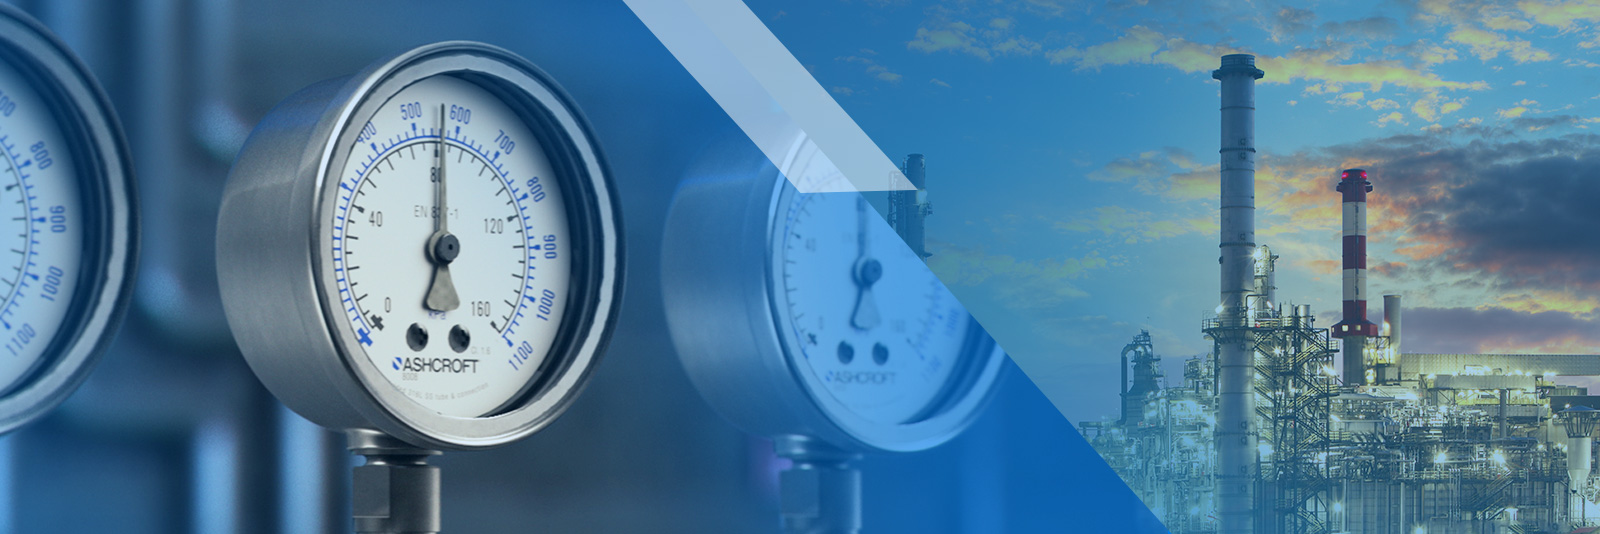 How Does Temperature Affect Pressure Gauge Performance?